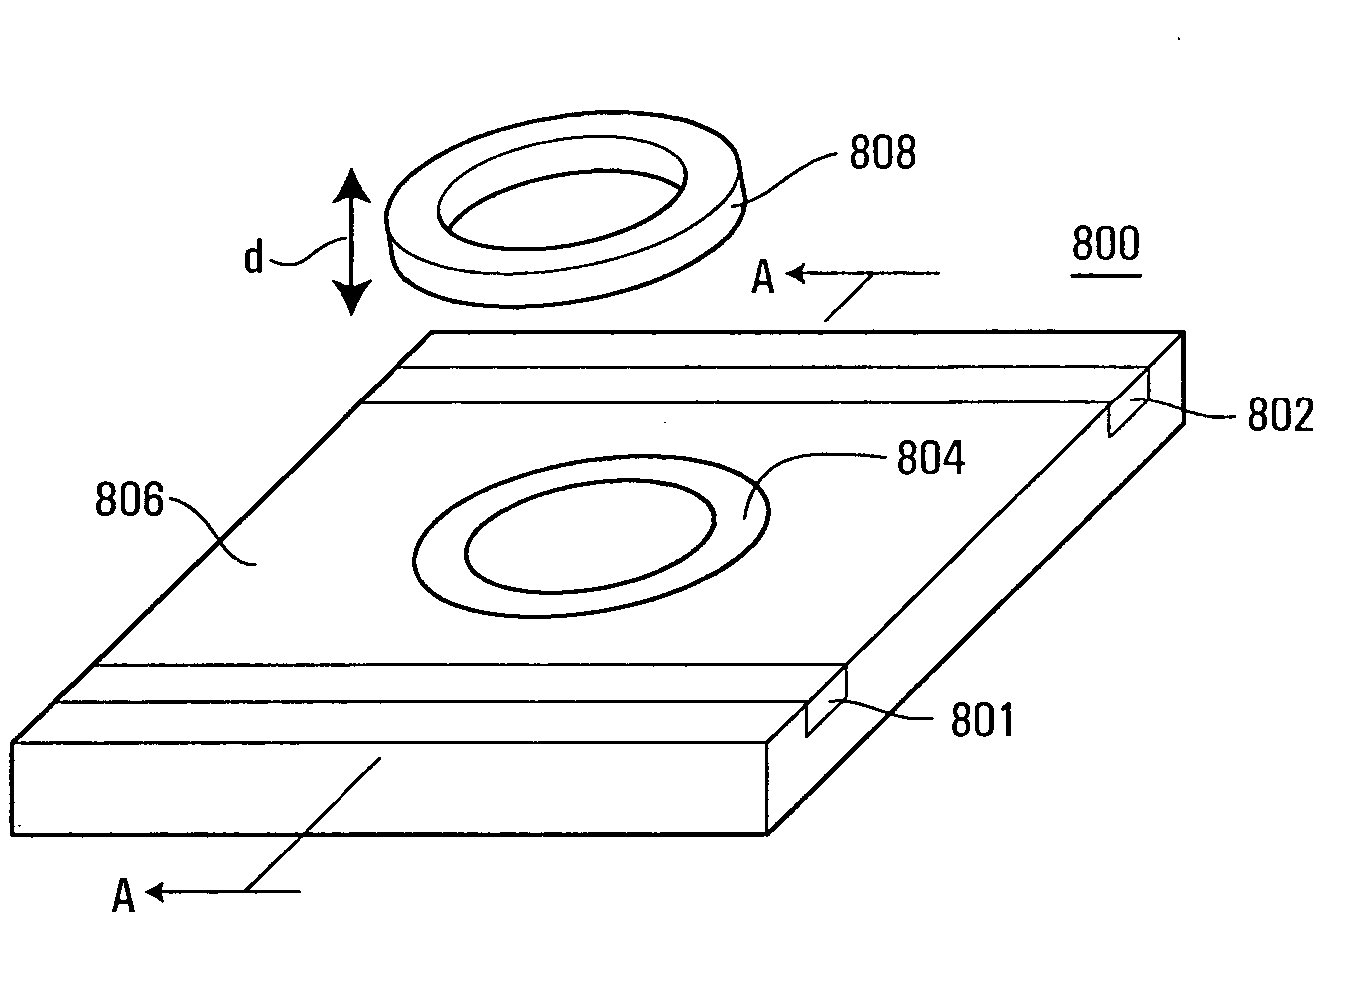 Tunable optical filter